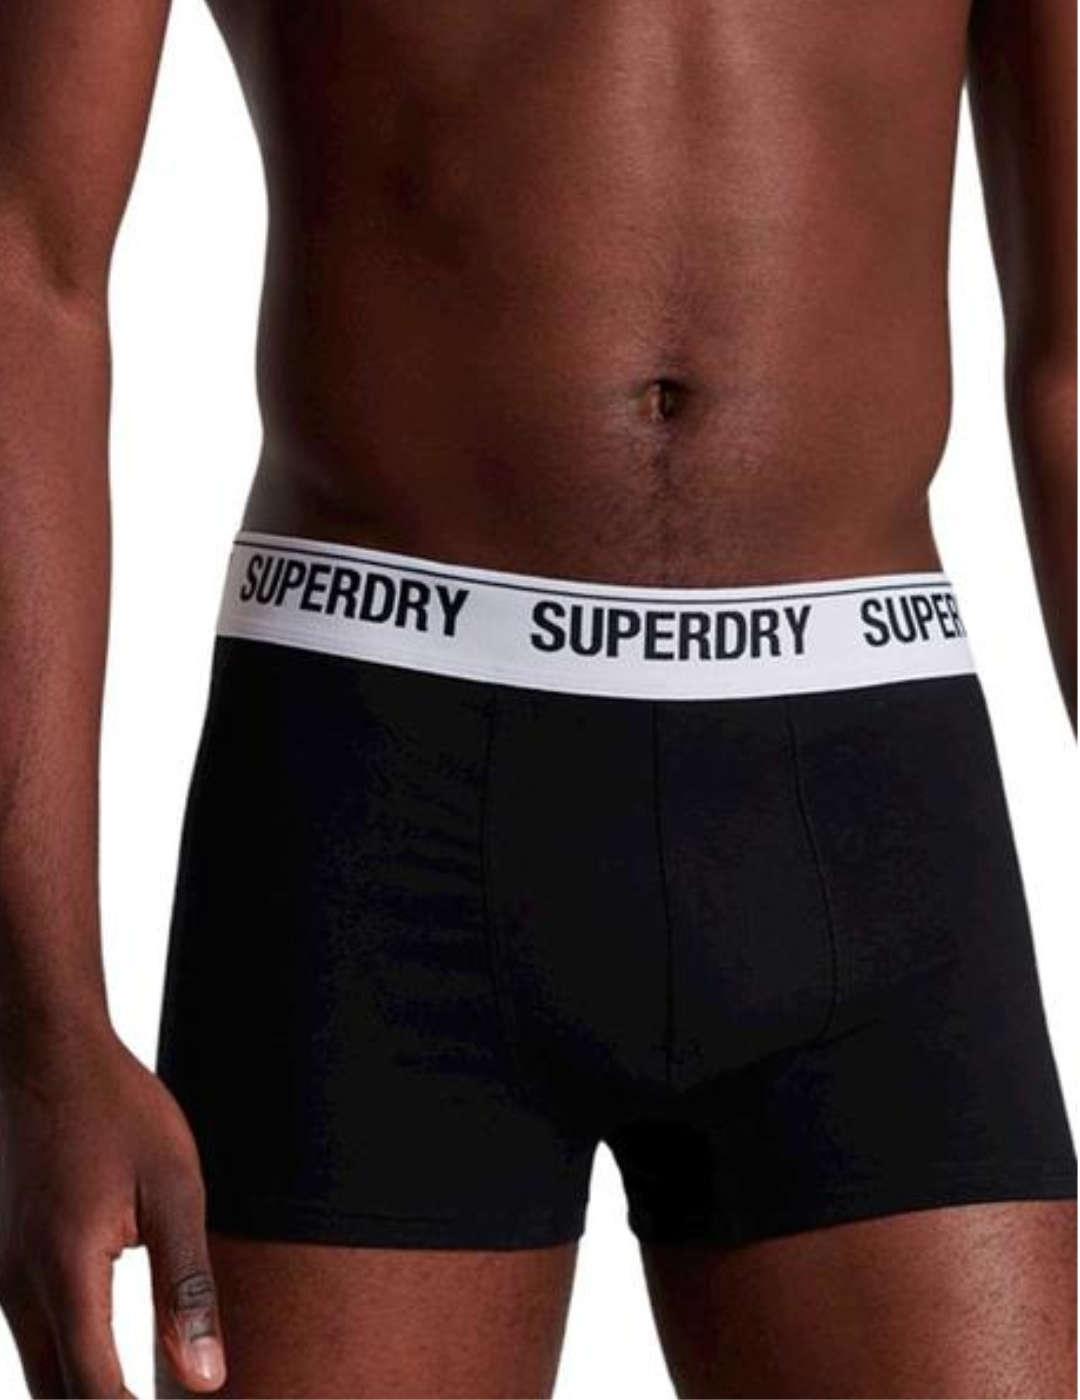 Intimo Superdry pack-3 gris/negro/blanco hombre